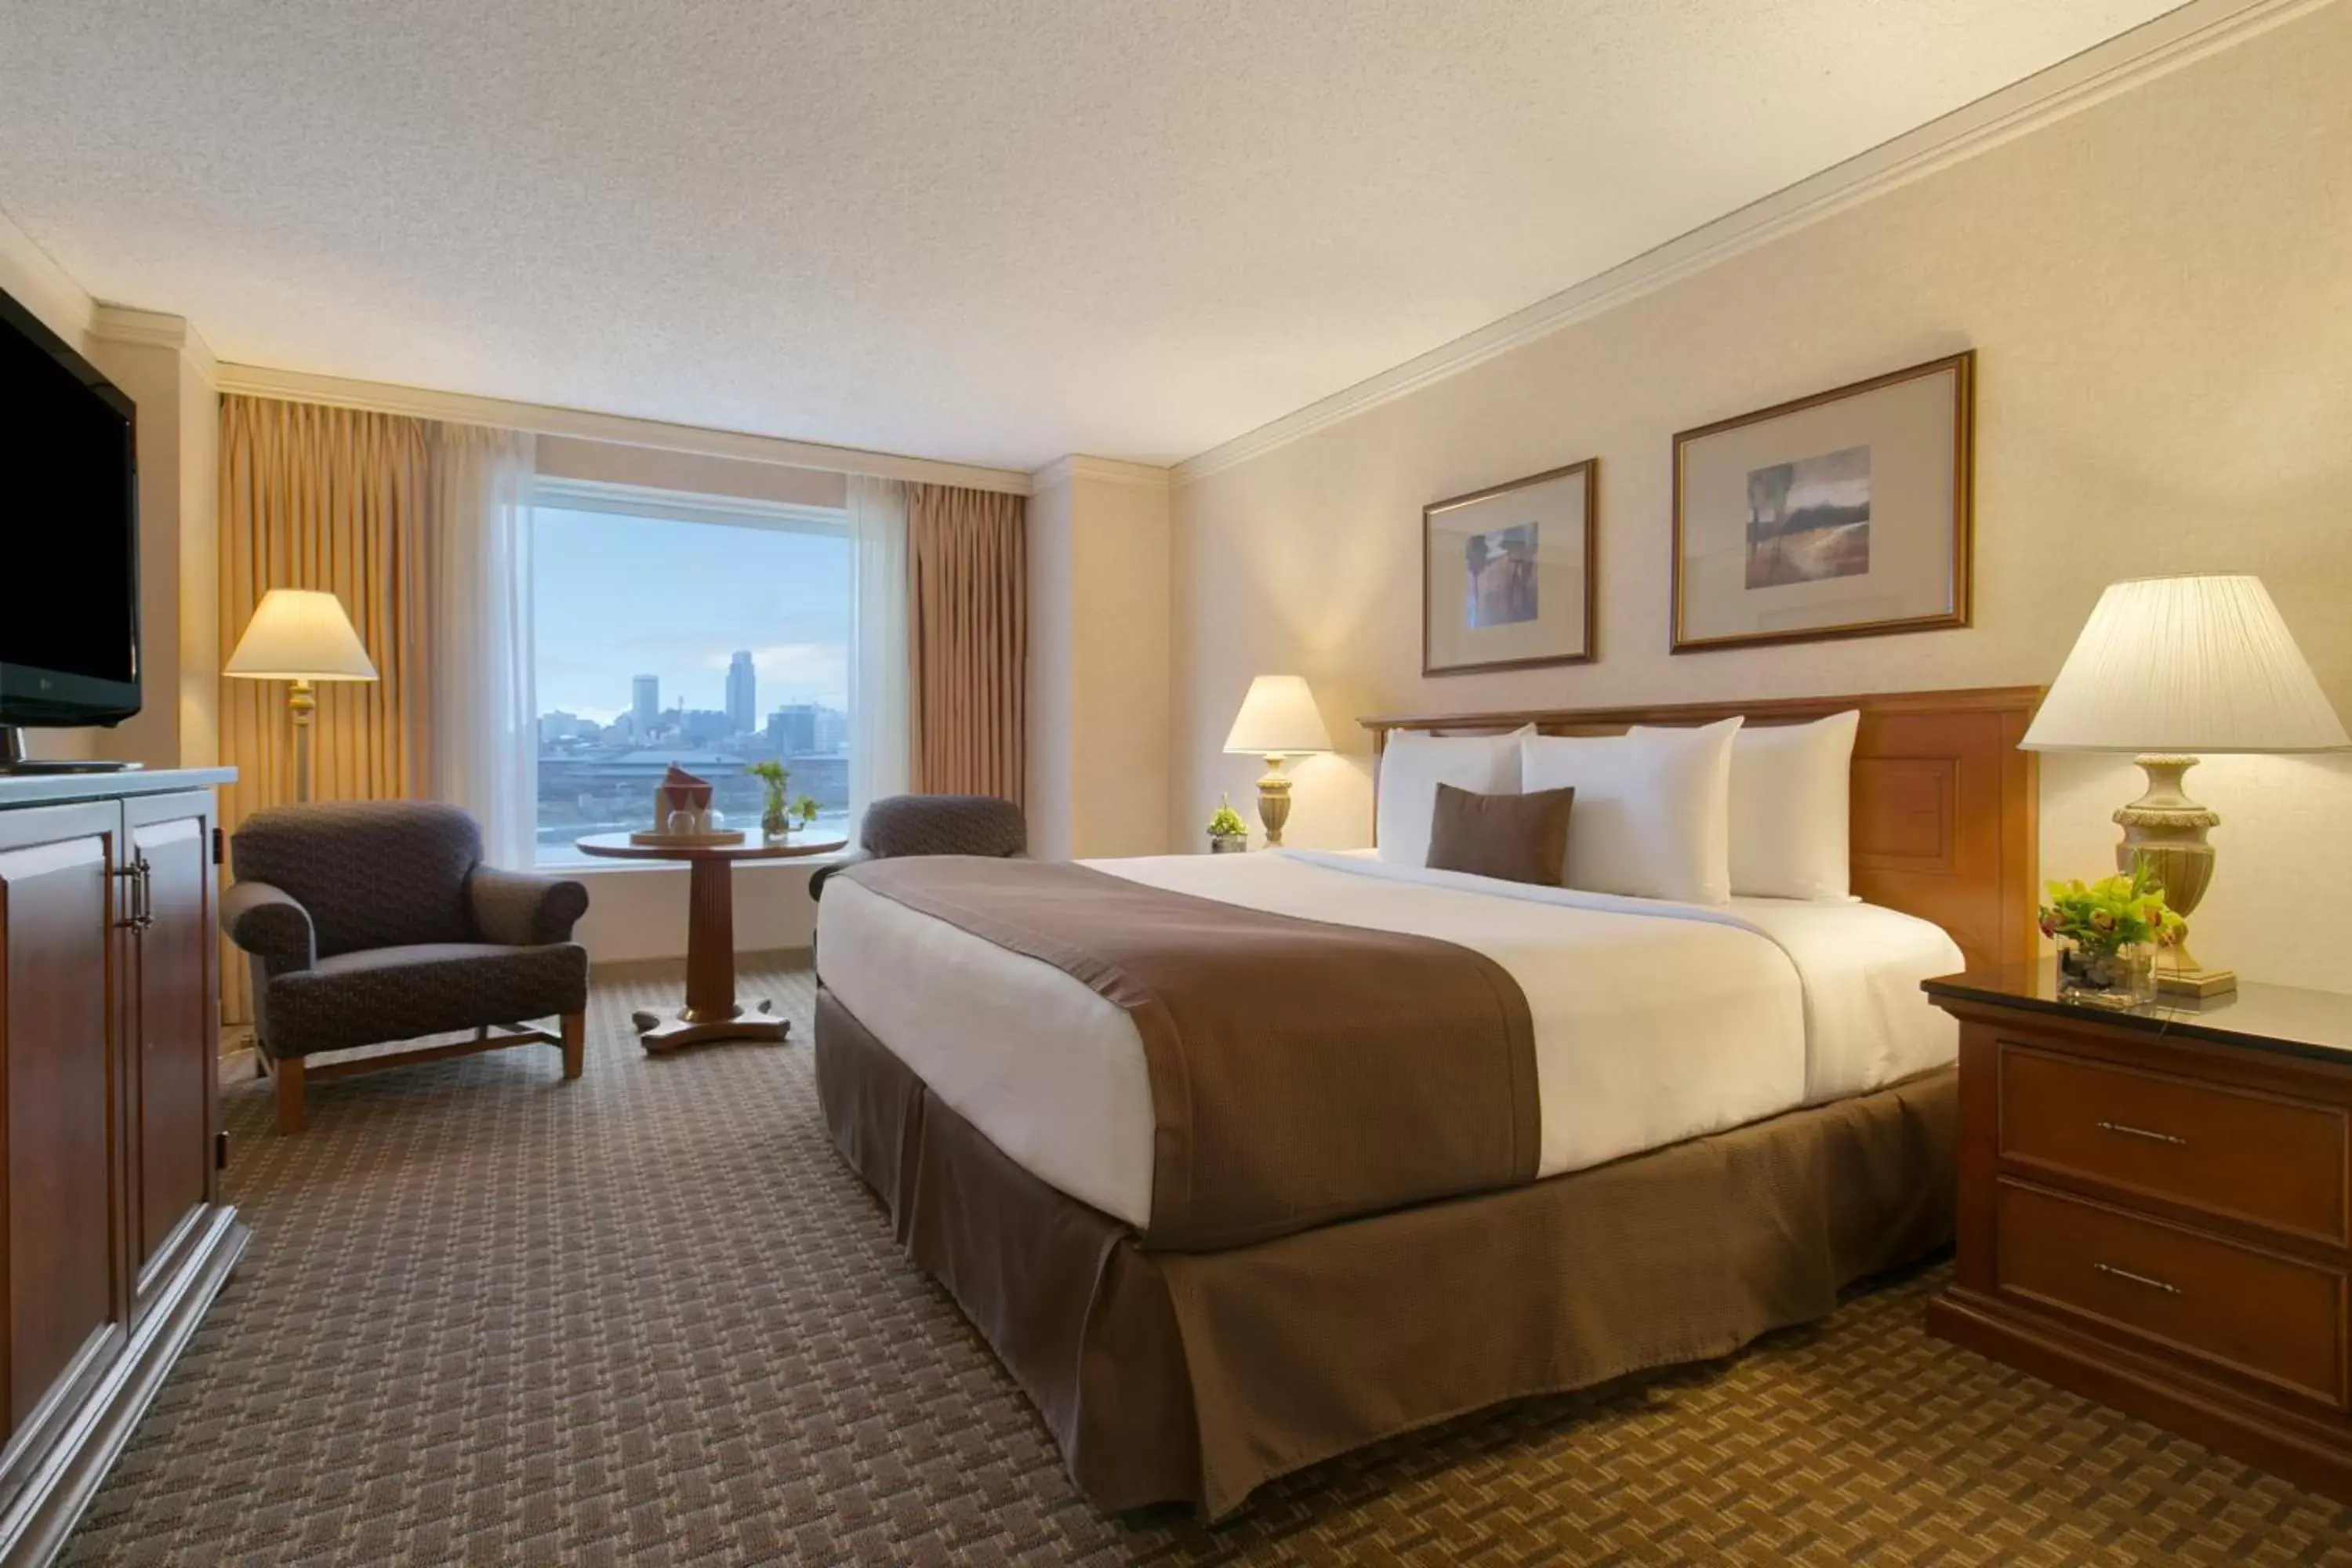 Superior King Room in Harrah's Casino & Hotel Council Bluffs